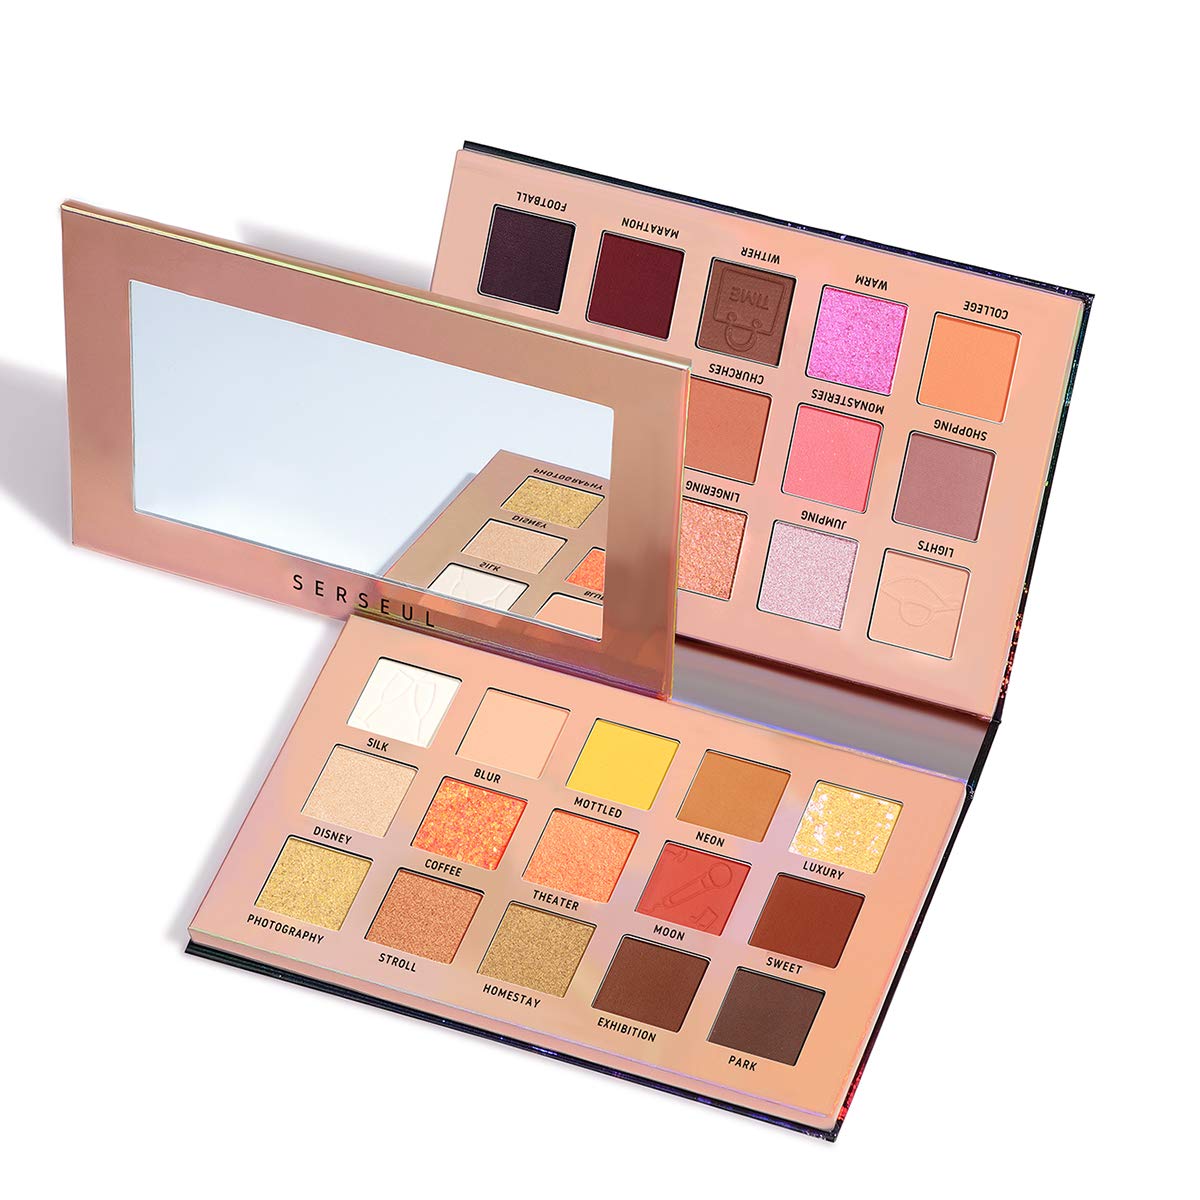  Serseul 30 Color Matte and Shimmer Eyeshadow Palette Highly pigmented Eye Makeup Creamy Texture Blendable Long Lasting EyeShadow Cruelty Free（Beautiful Drunk Time）